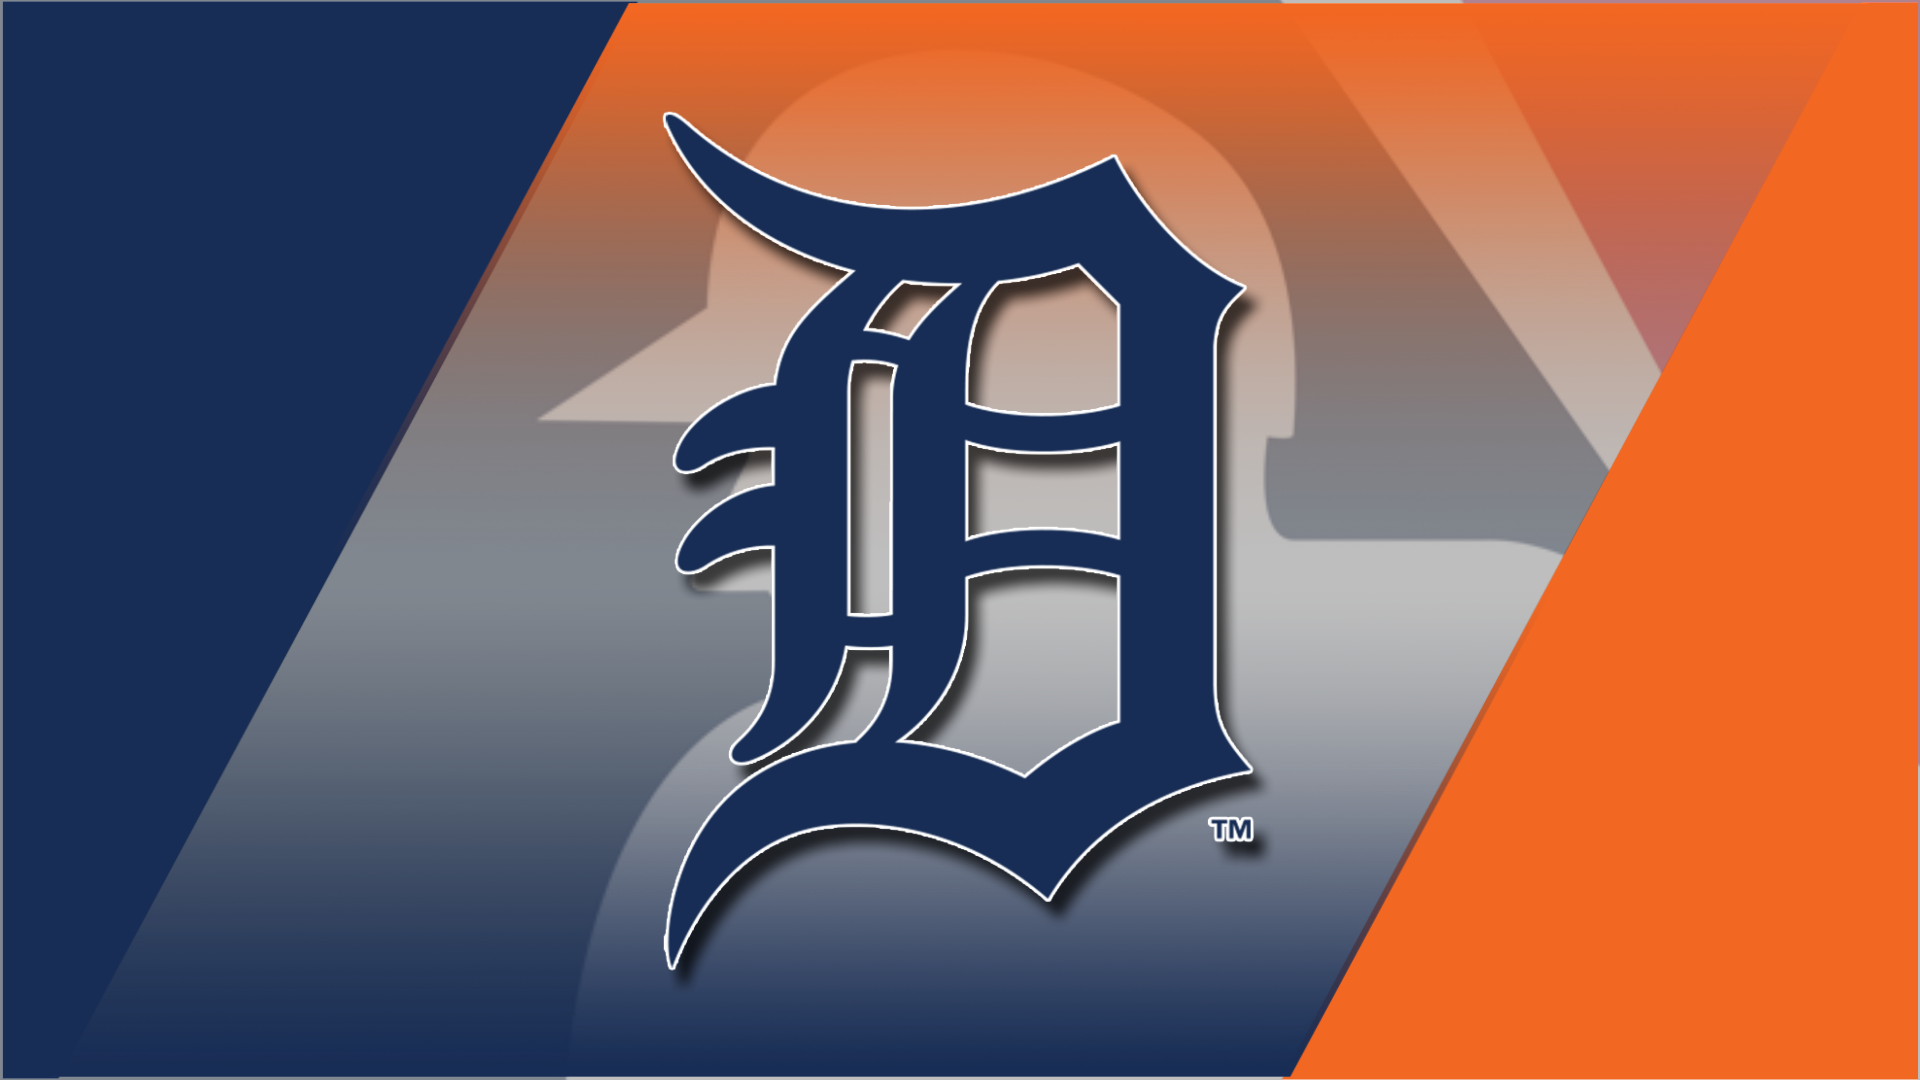 POLL: How do you think the Tigers will do this season?